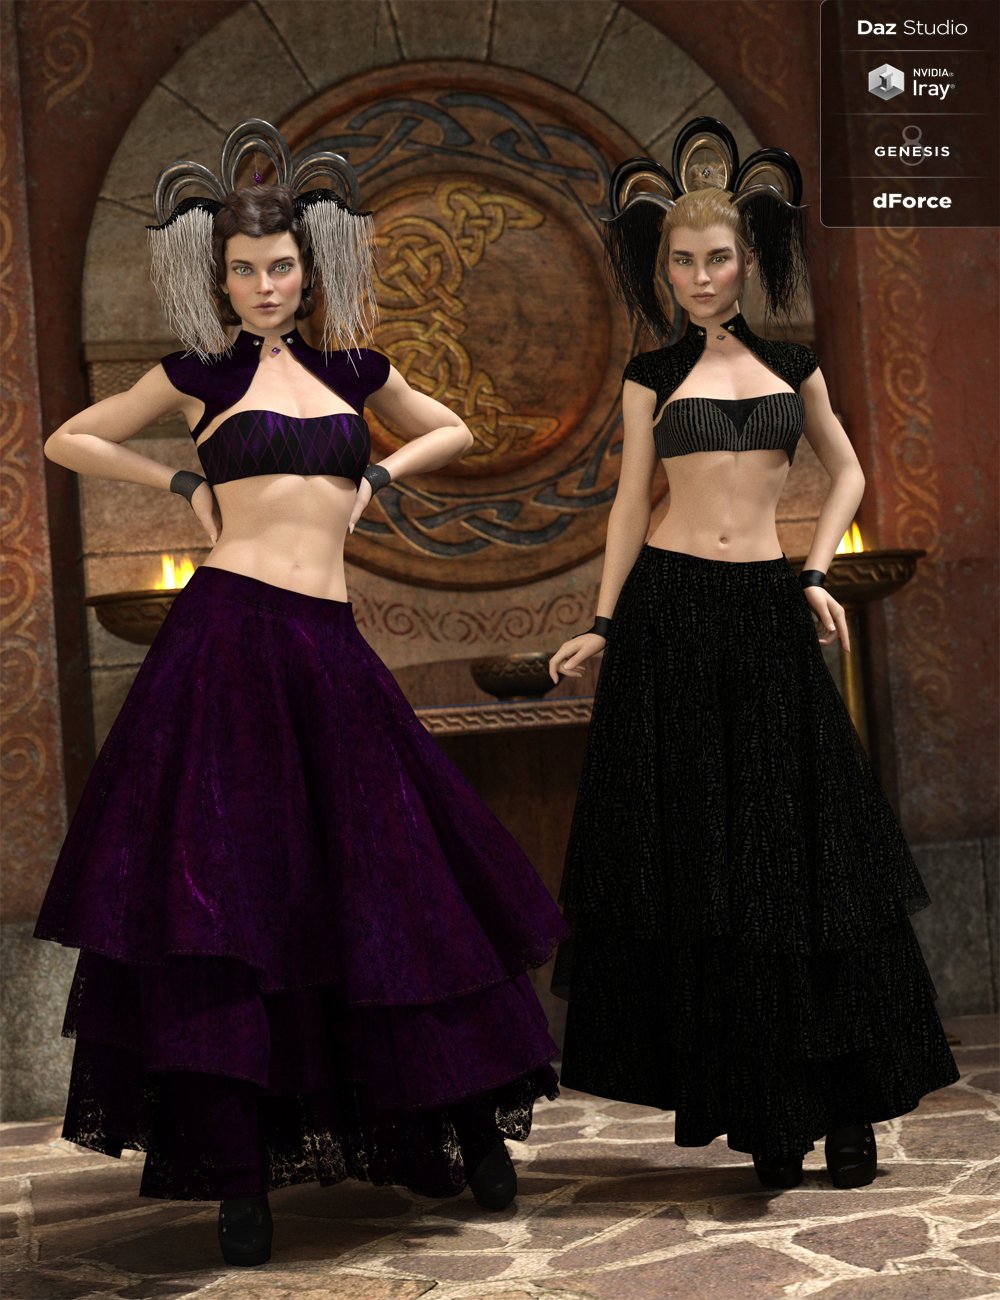 dforce minute 2 midnight outfit textures 00 main daz3d 1711924694